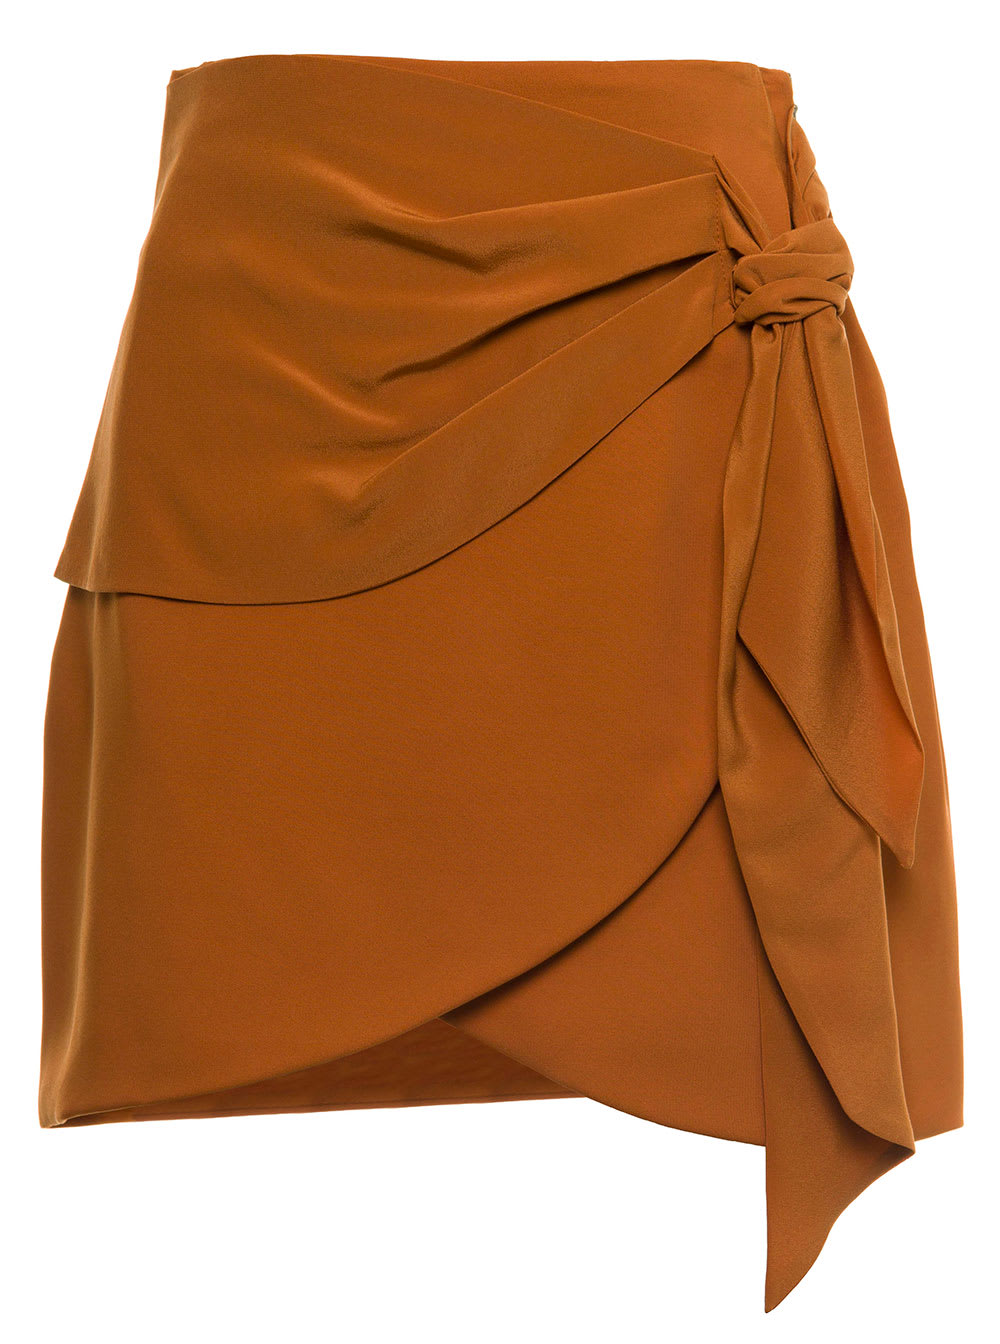 Federica Tosi Brick Color Skirt With Knotted Detail